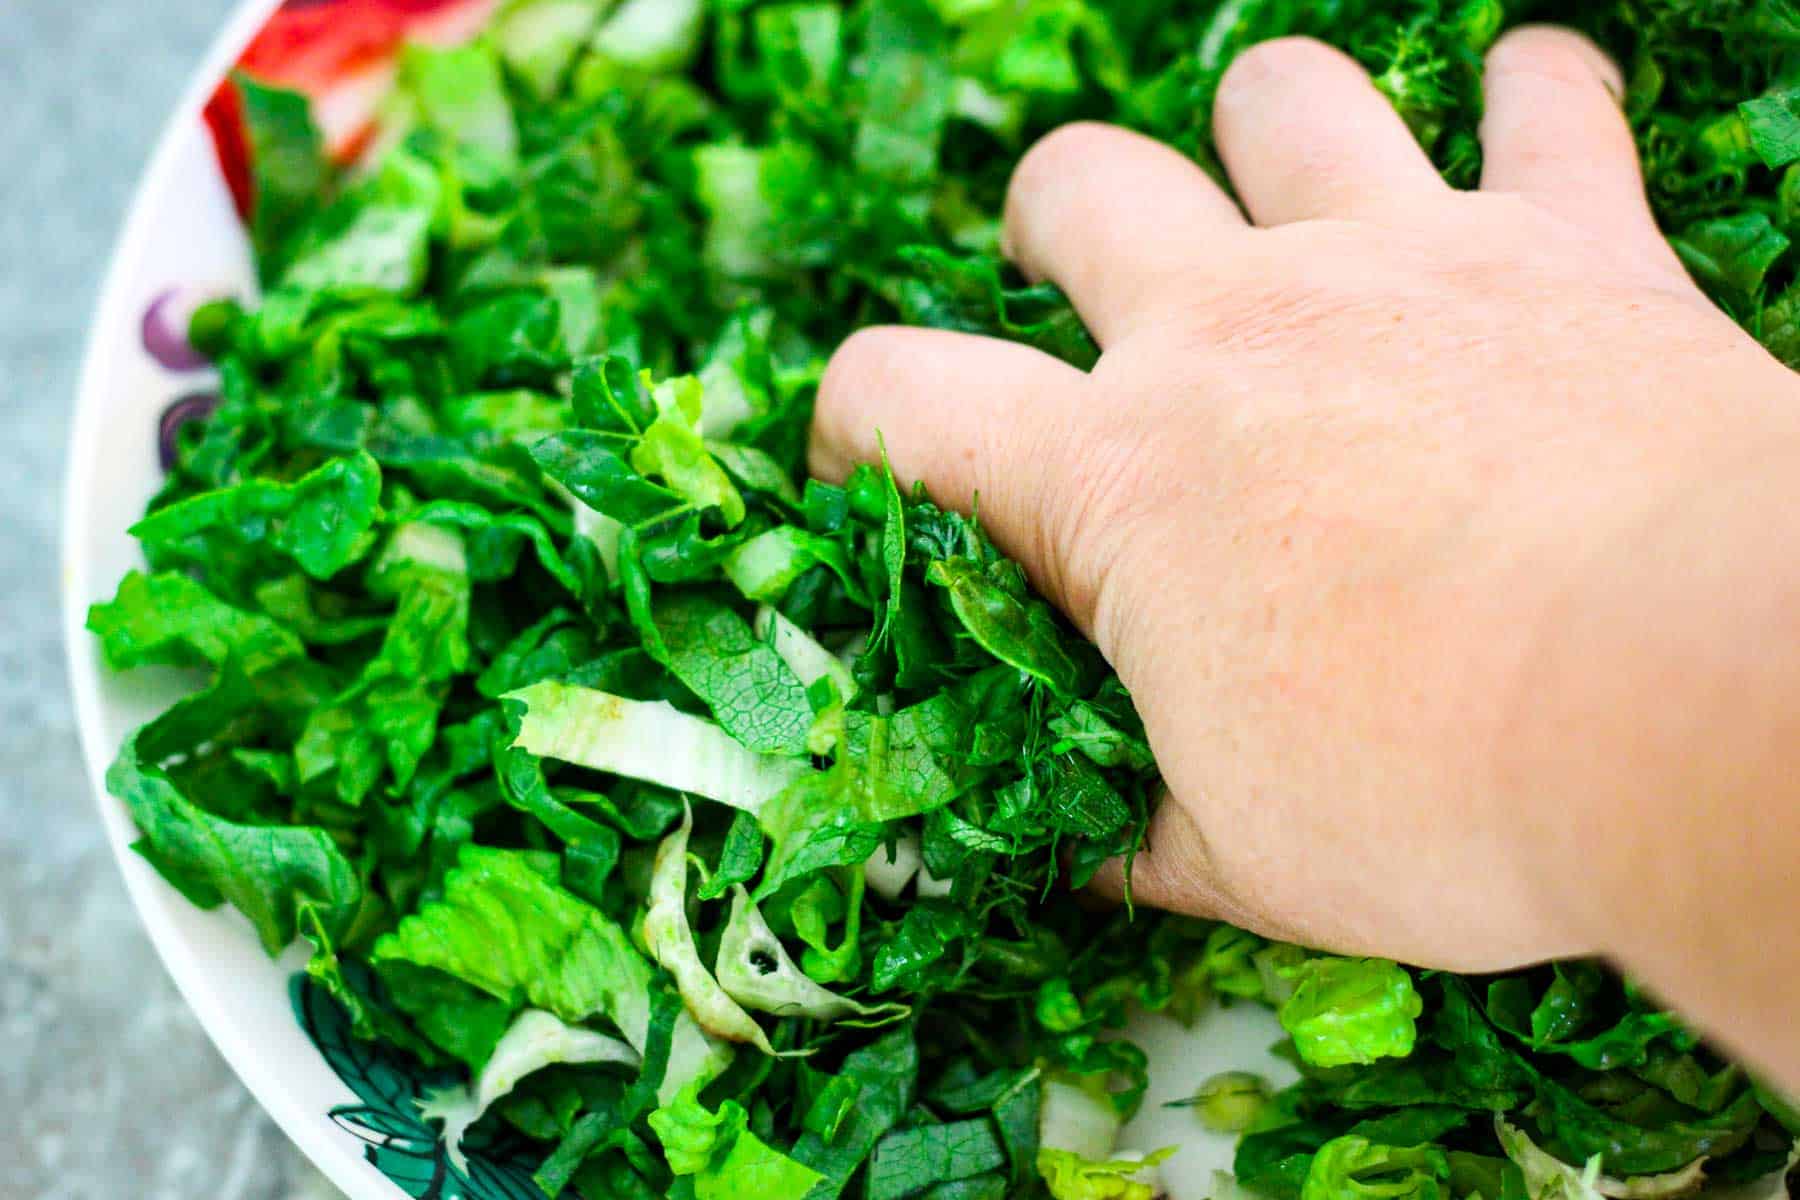 Massaging lettuce, dill, scallions and salt and lemon to fuse flavors. Picture shows a hand over the salad bowl squeezing all the ingredients together. 